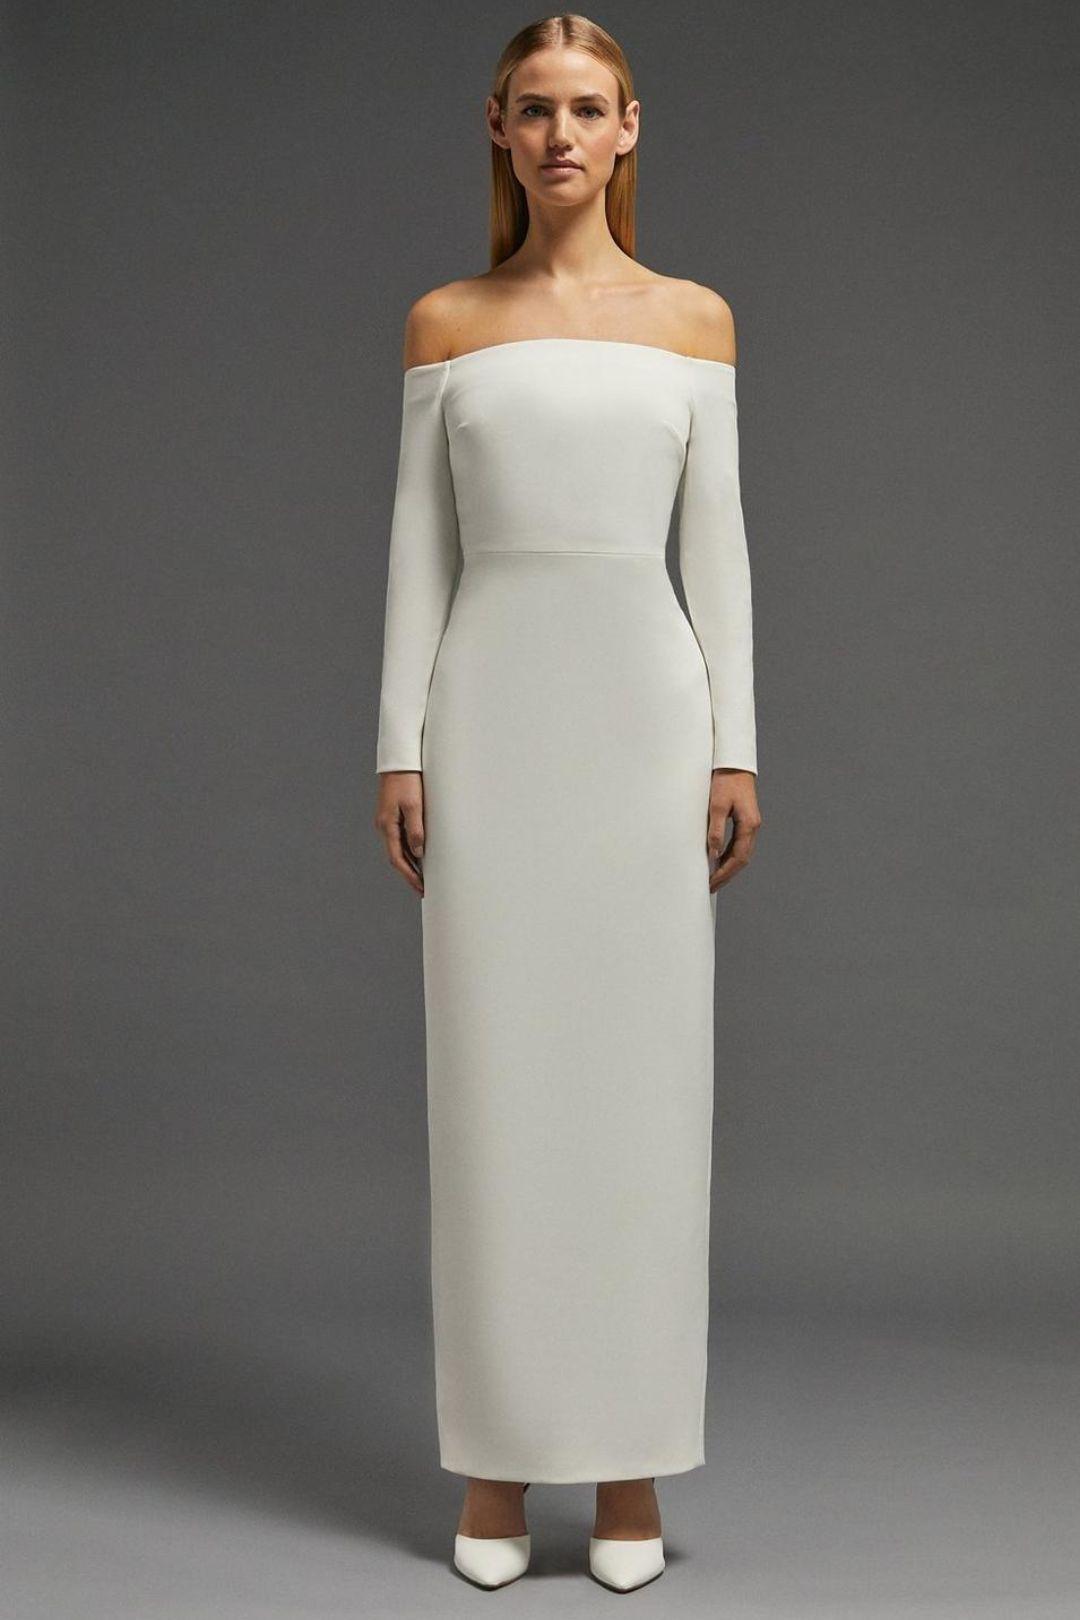 40 of the Best Simple Wedding Dresses for Understated Brides - hitched ...